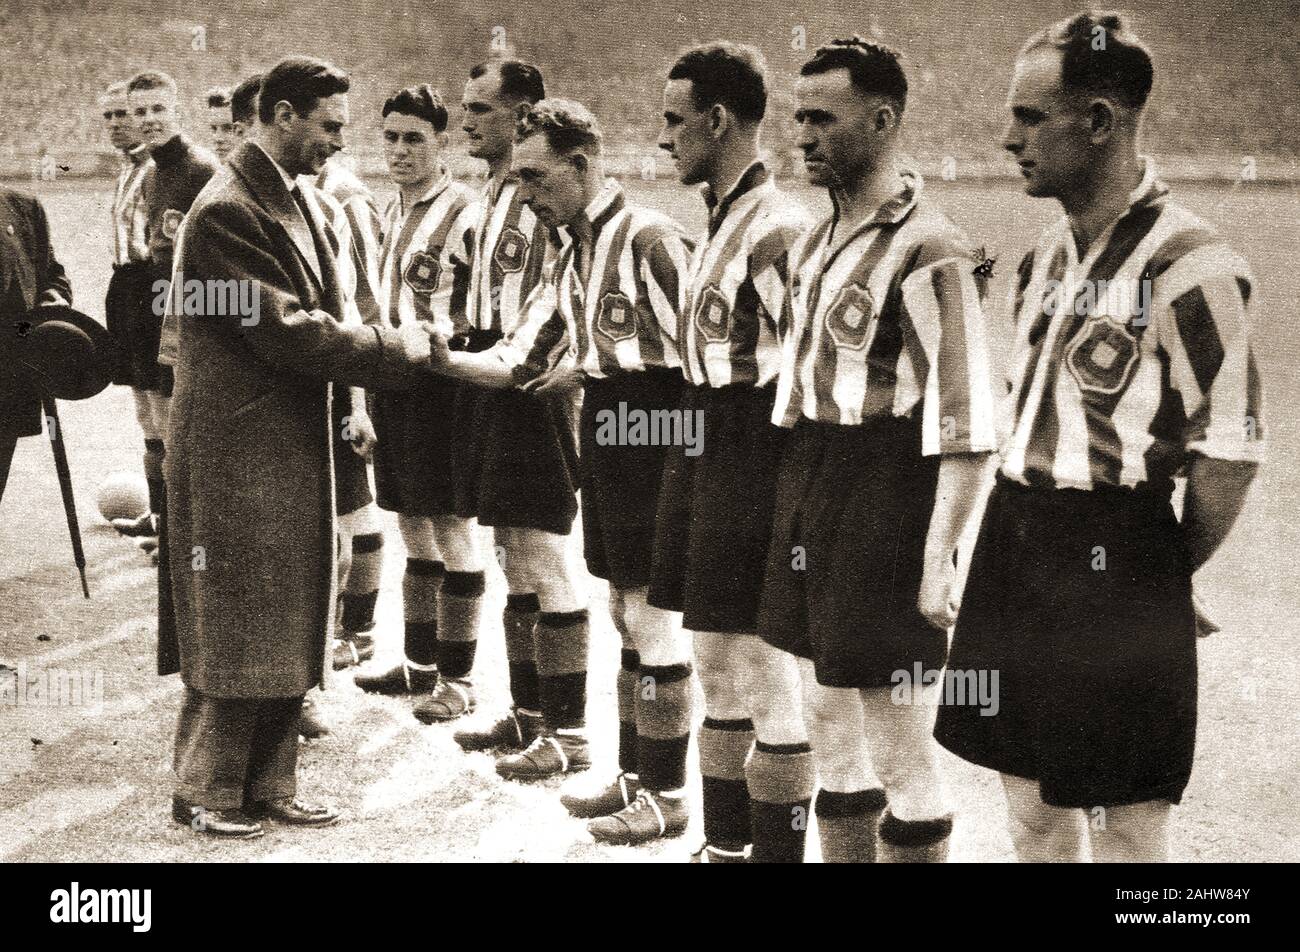 English FA cup final 1937 - (Sunderland v Preston North End, played  at Empire Stadium, Wembley - King George meets the Sunderland   team who 3-1. Stock Photo